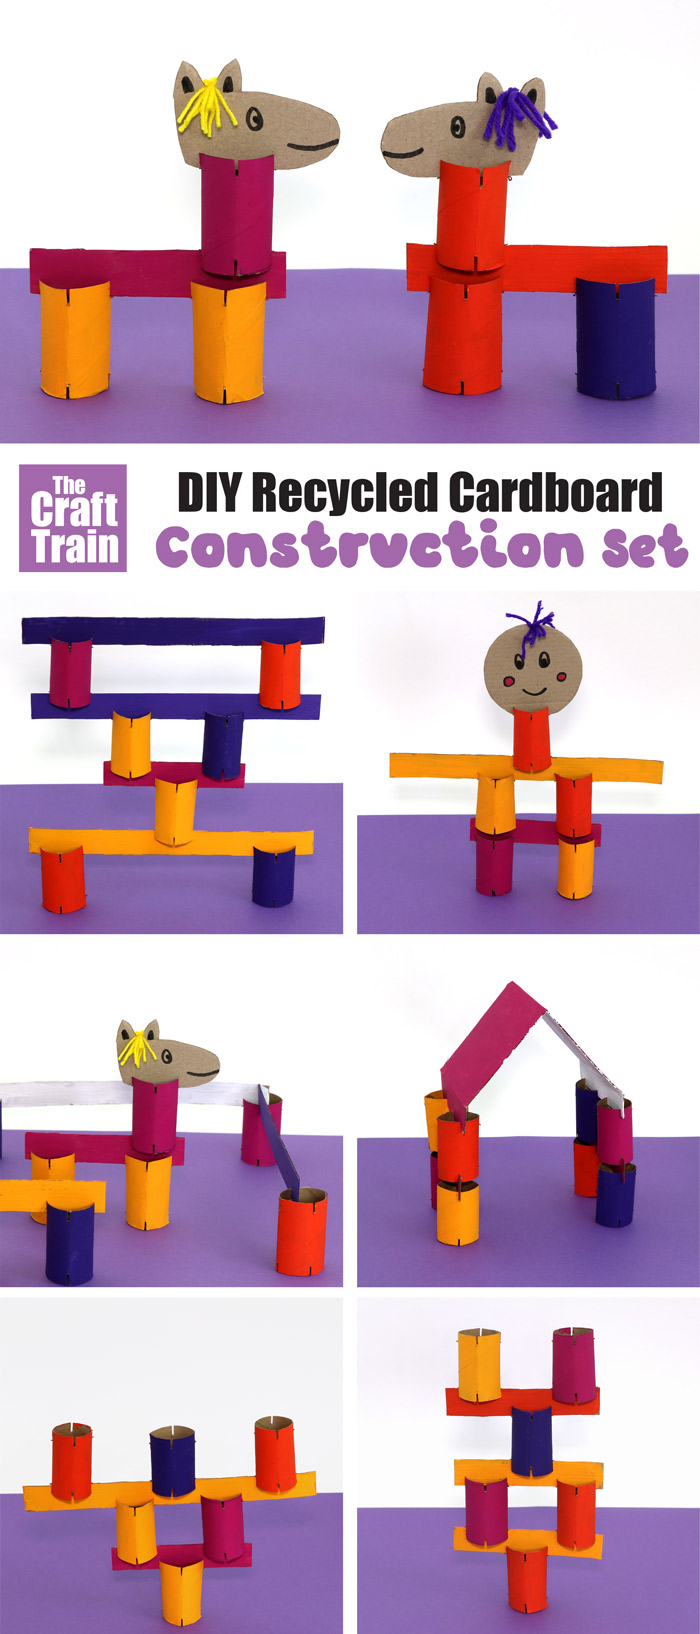 DIY construction kit for kids from recycled cardboard